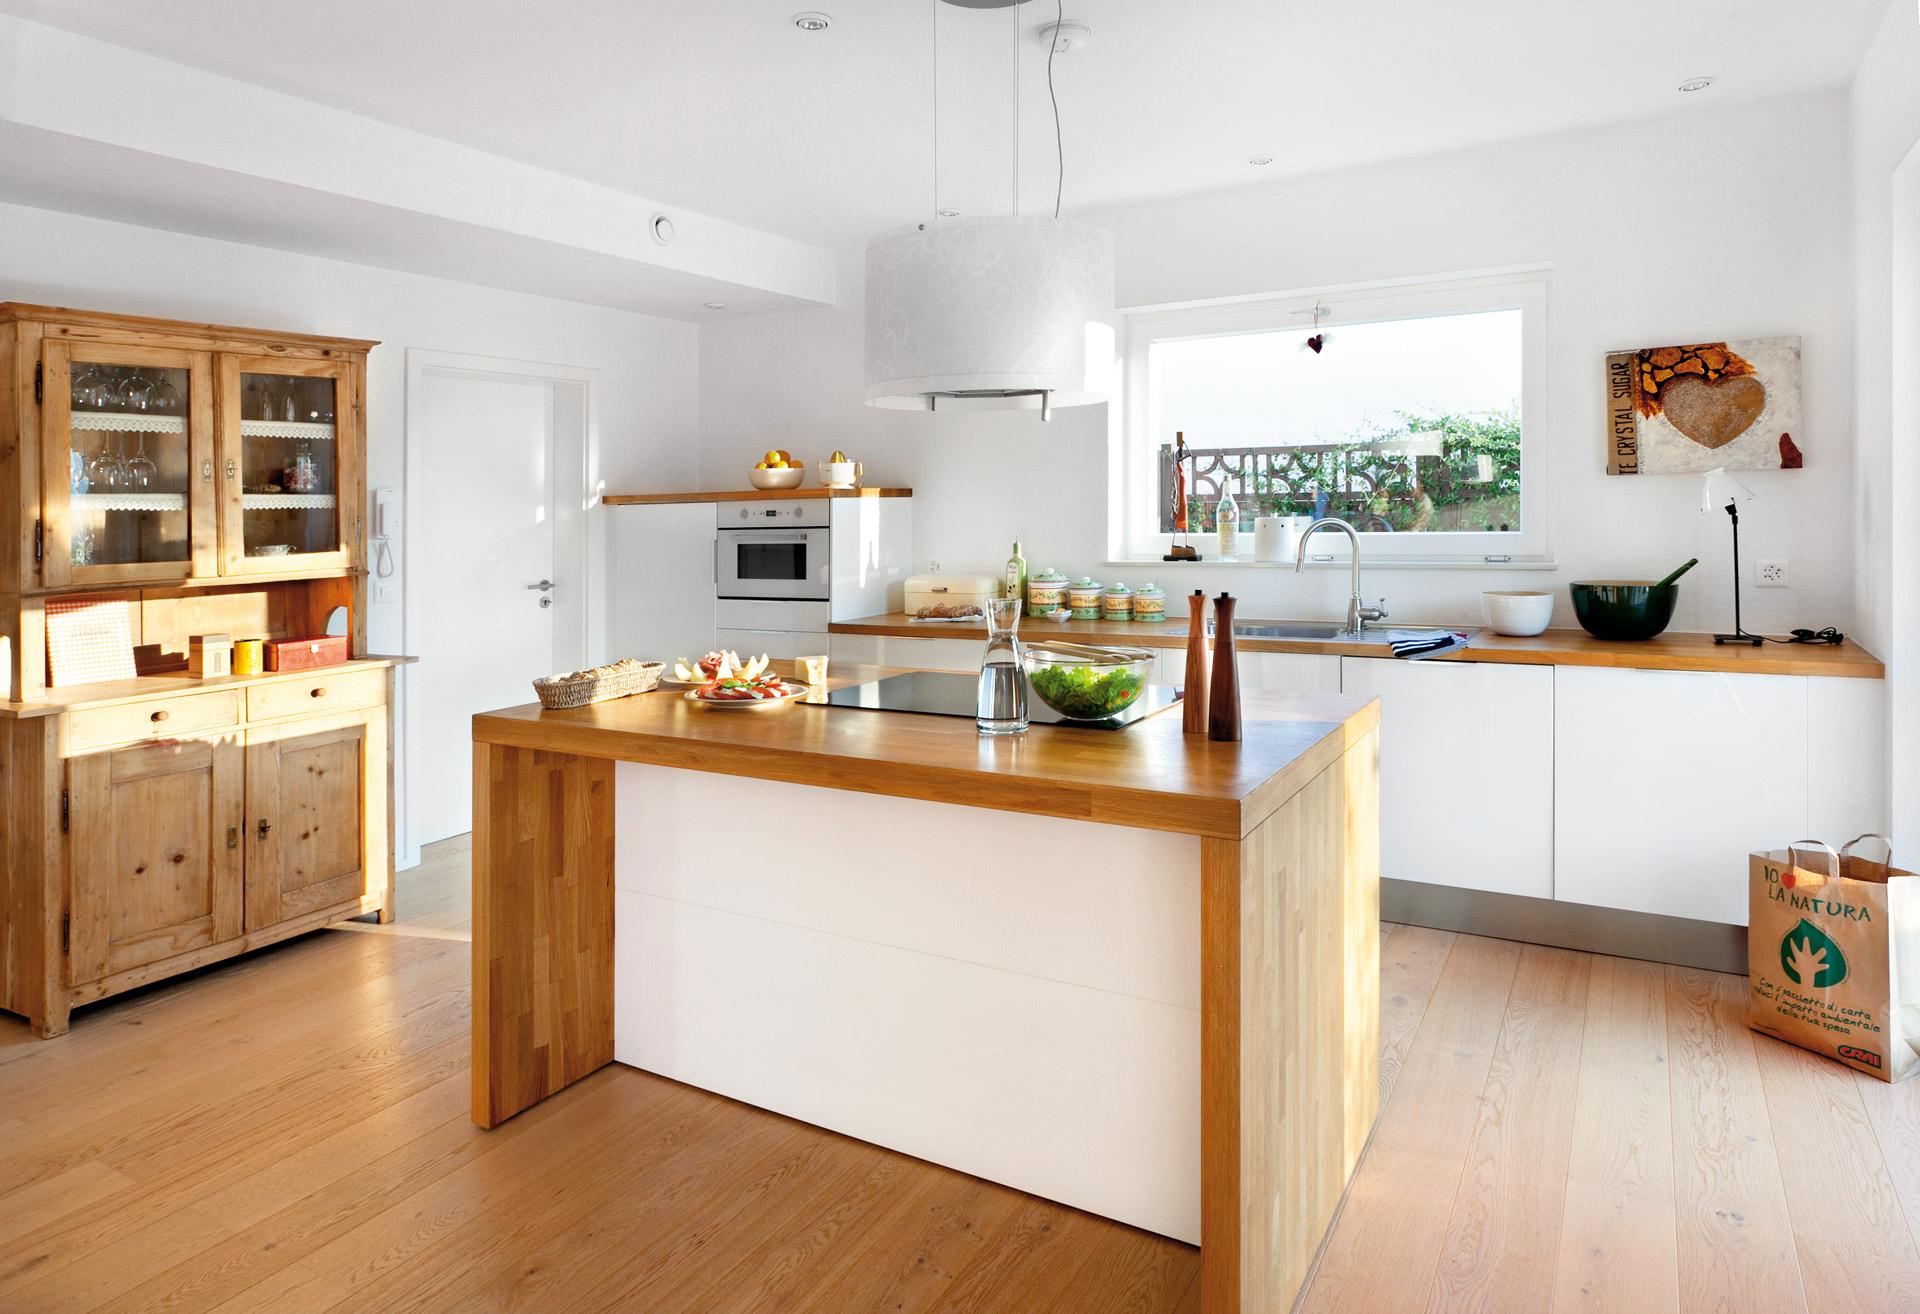 Modern kitchen in the country house look